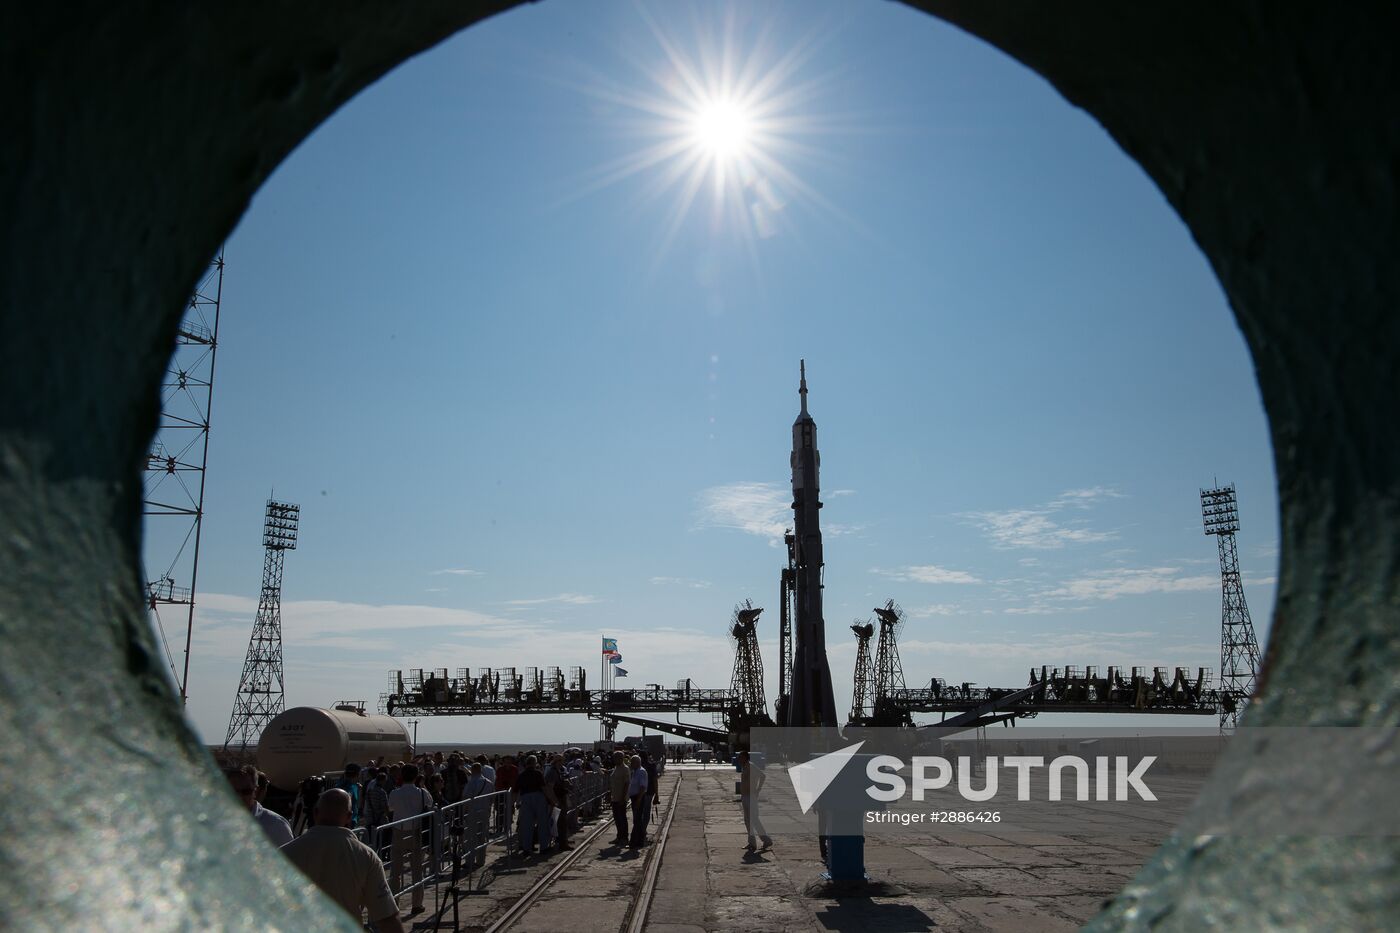 Soyuz-FG carrier rocket with Soyuz-MS manned spacecraft moved onto launch pad